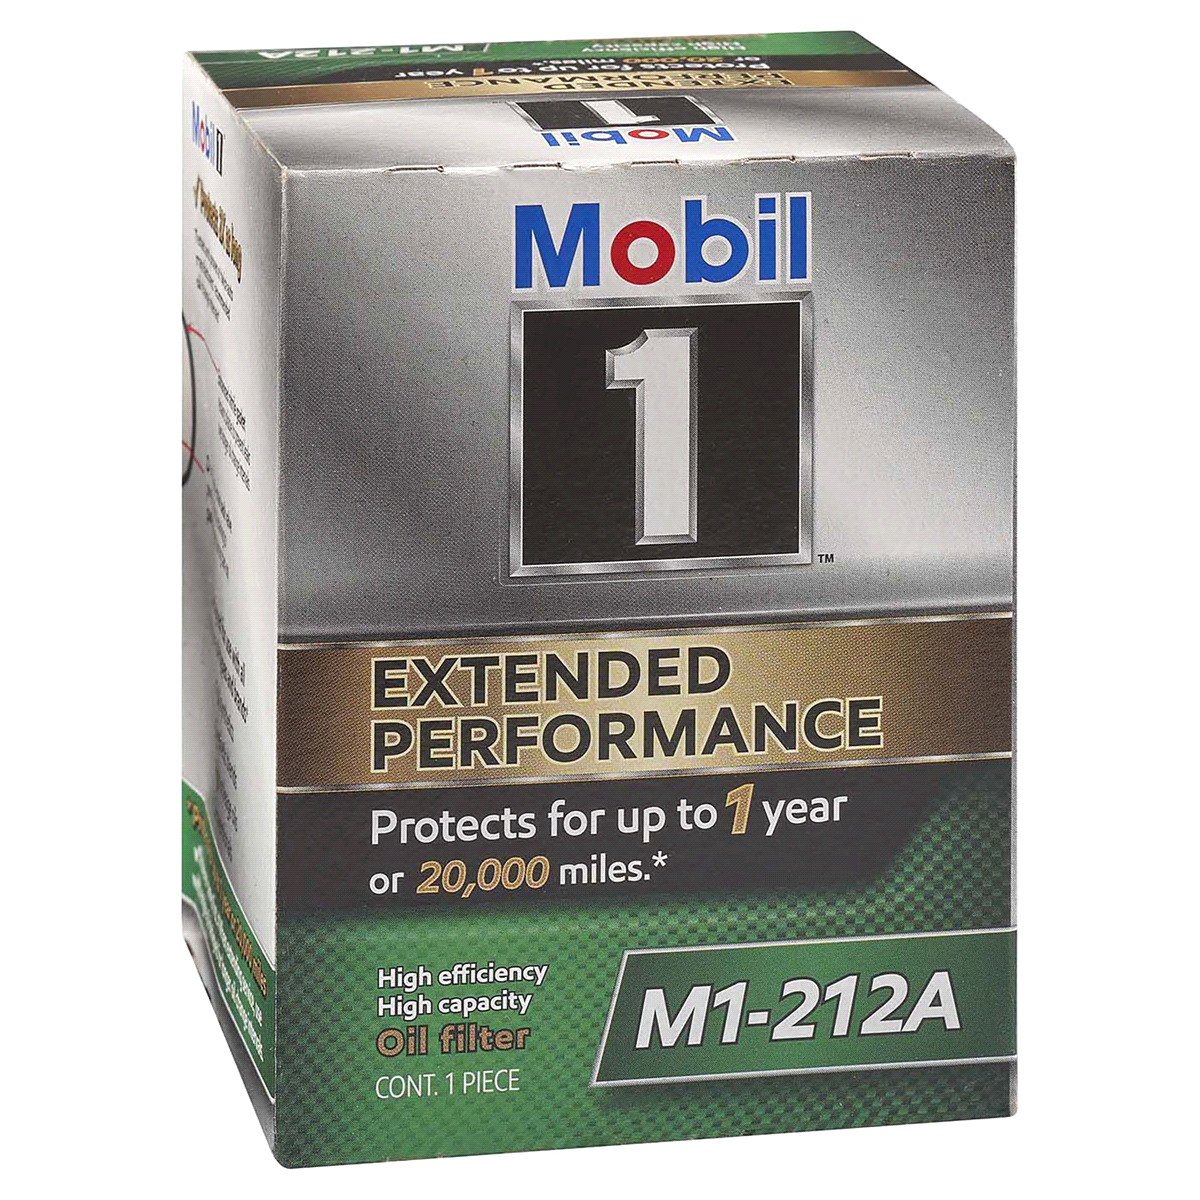 Mobil 1 Extended Performance M1-212 Oil Filter 1 ct